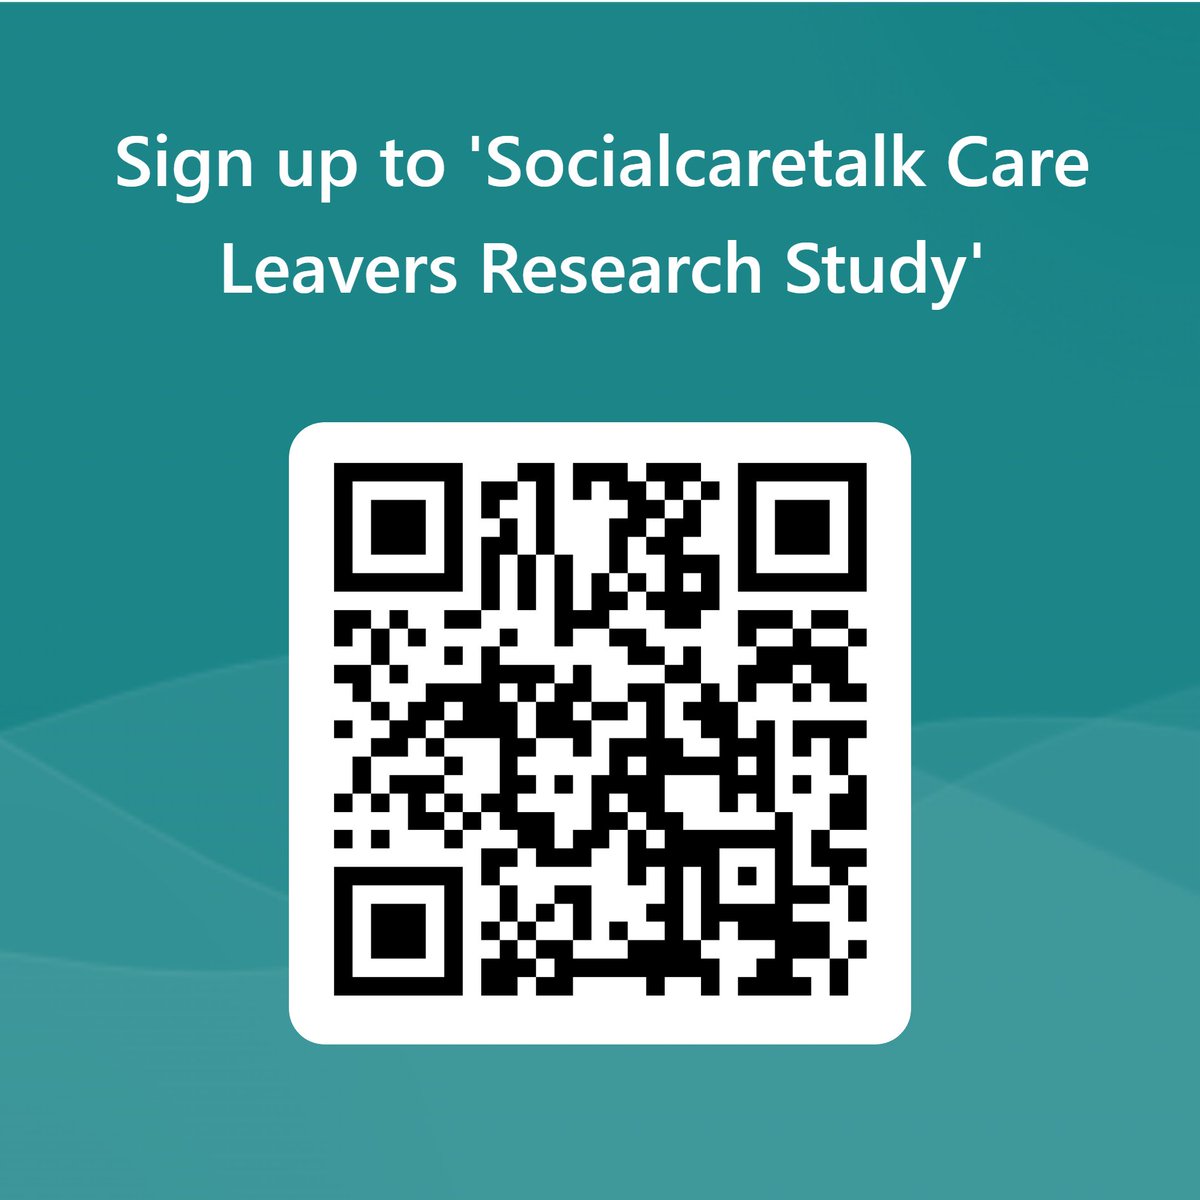 If you're interested in participating in our #careleavers study, please sign up and we will contact you! Sign up here: forms.office.com/e/19dSdMCT0j or use the QR code #leavingcare #careexperienced  #socialcareresearch #livedexperience #empowerment